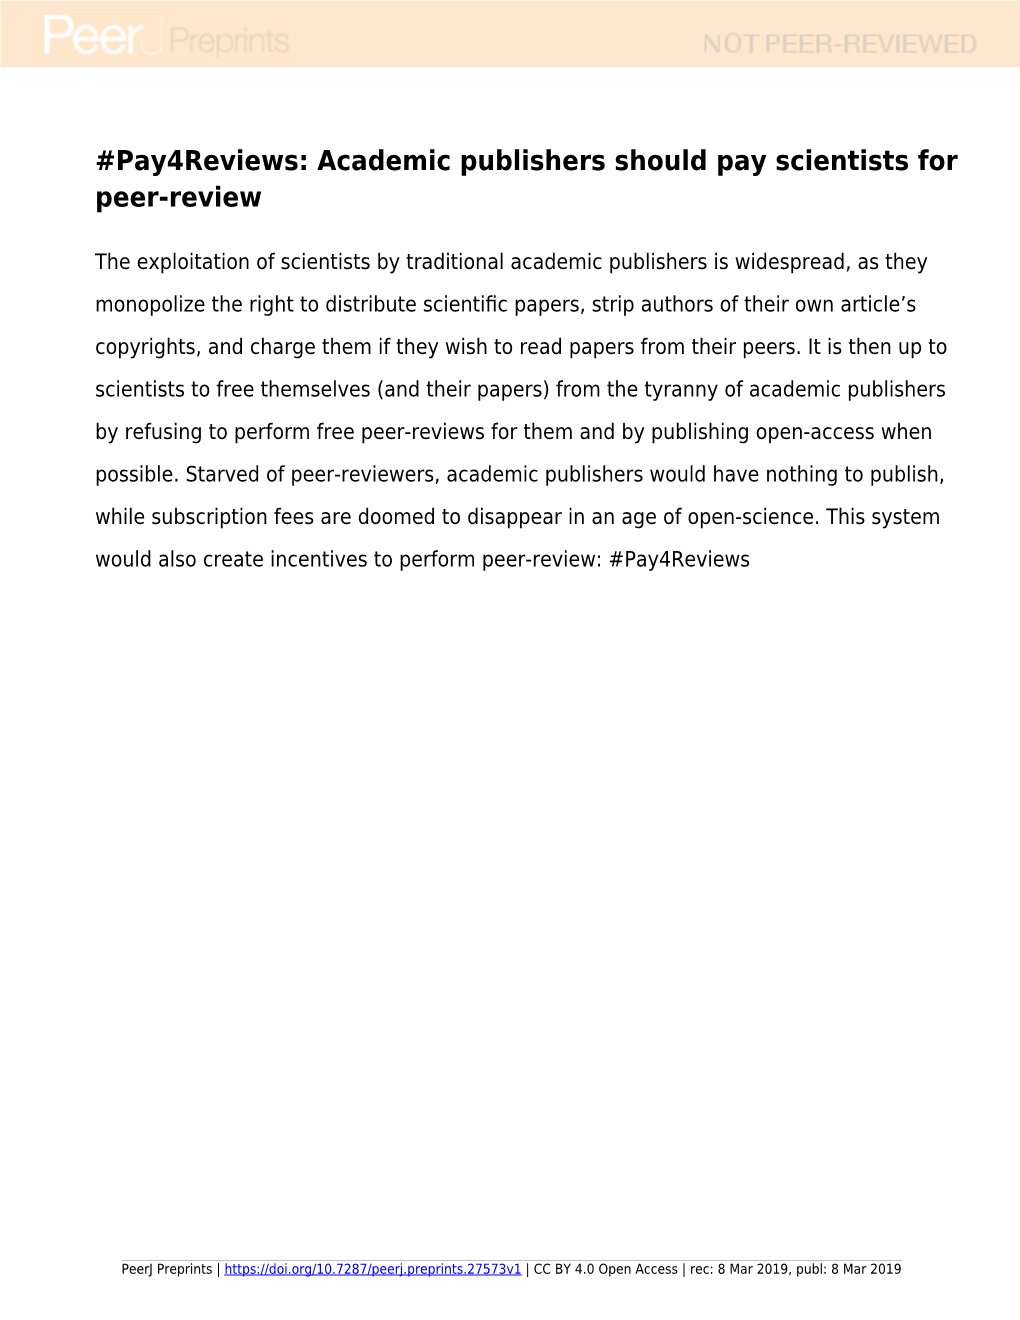 Pay4reviews: Academic Publishers Should Pay Scientists for Peer-Review